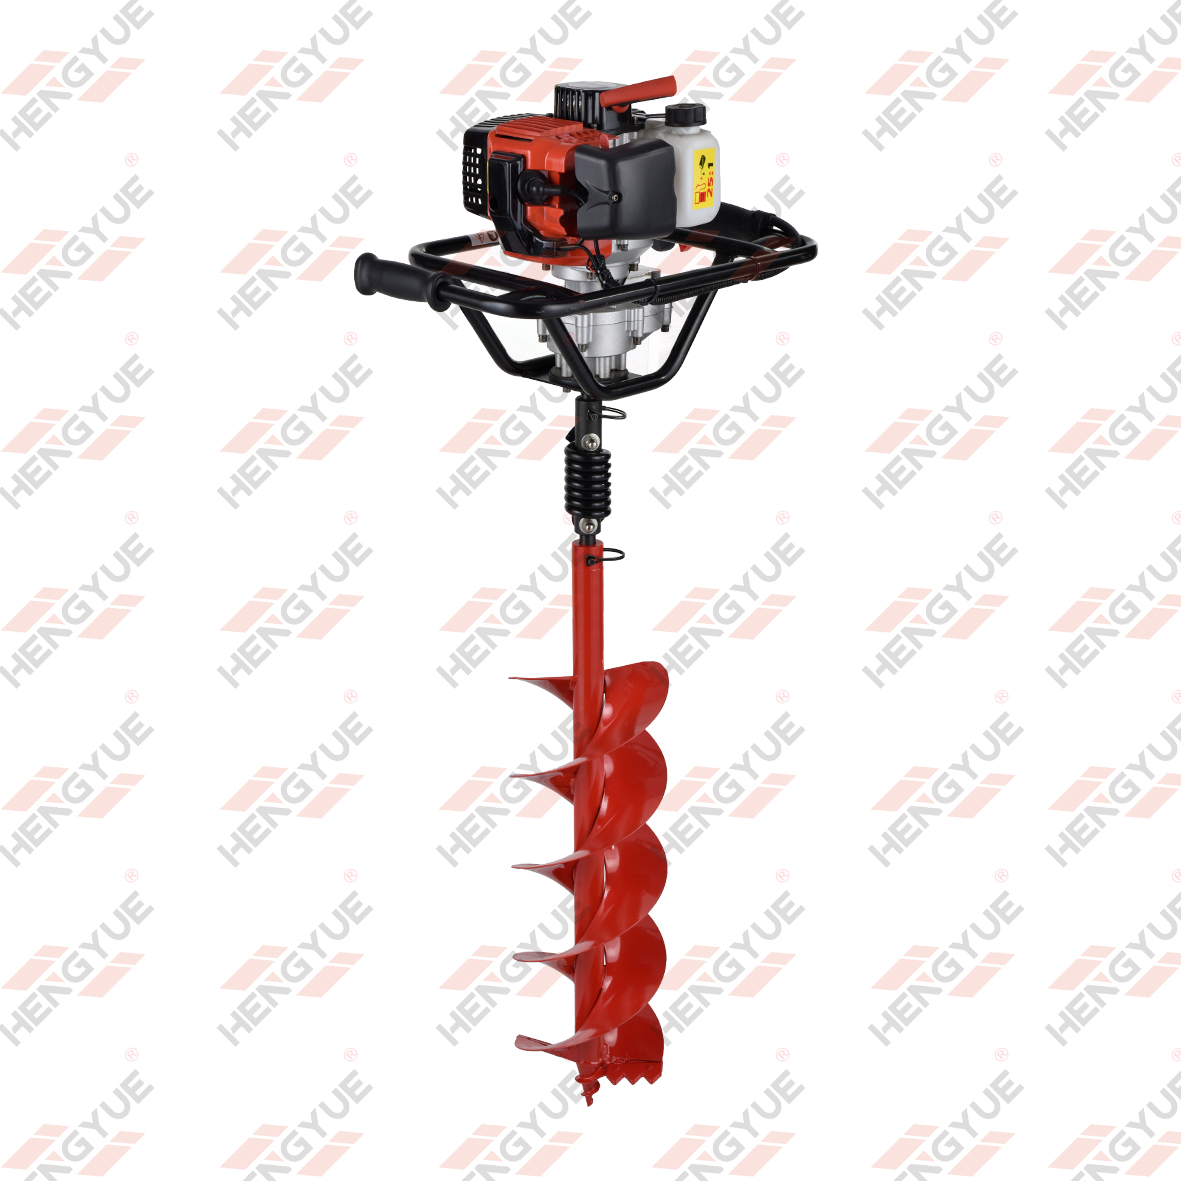 58cc Engine Power Earth Auger 